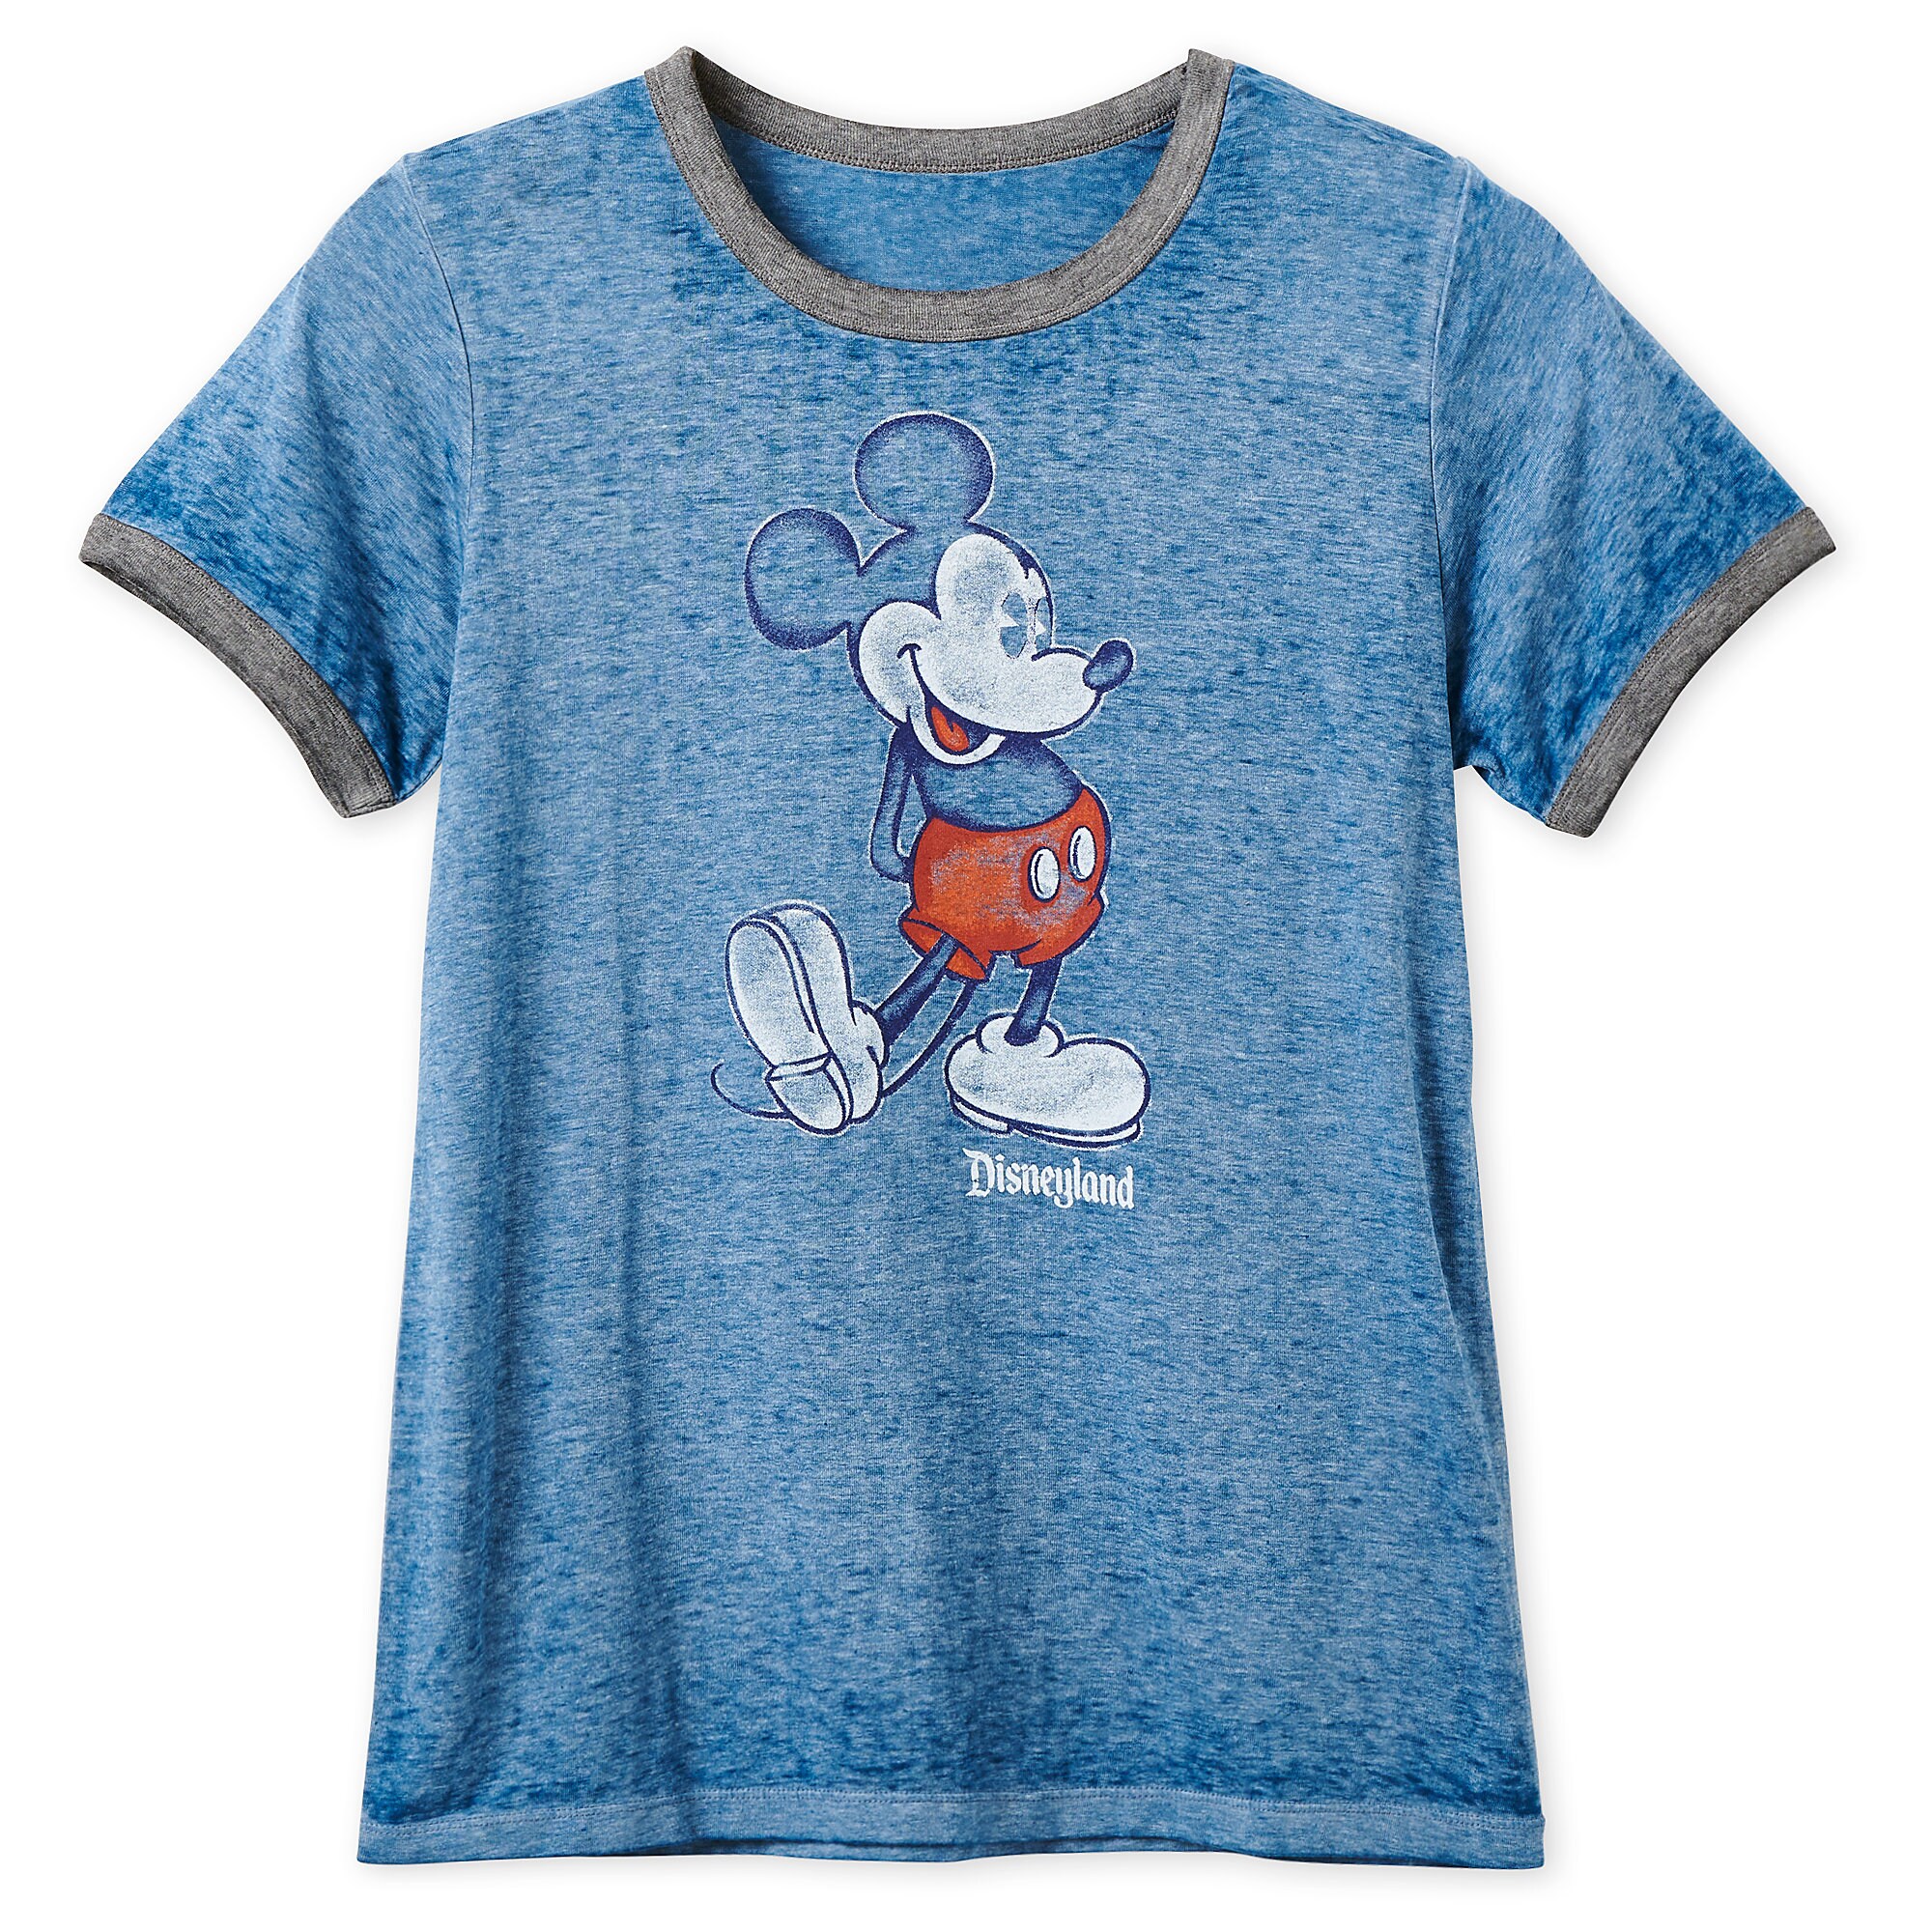 Mickey Mouse Heathered Ringer T-Shirt for Women - Disneyland - Navy